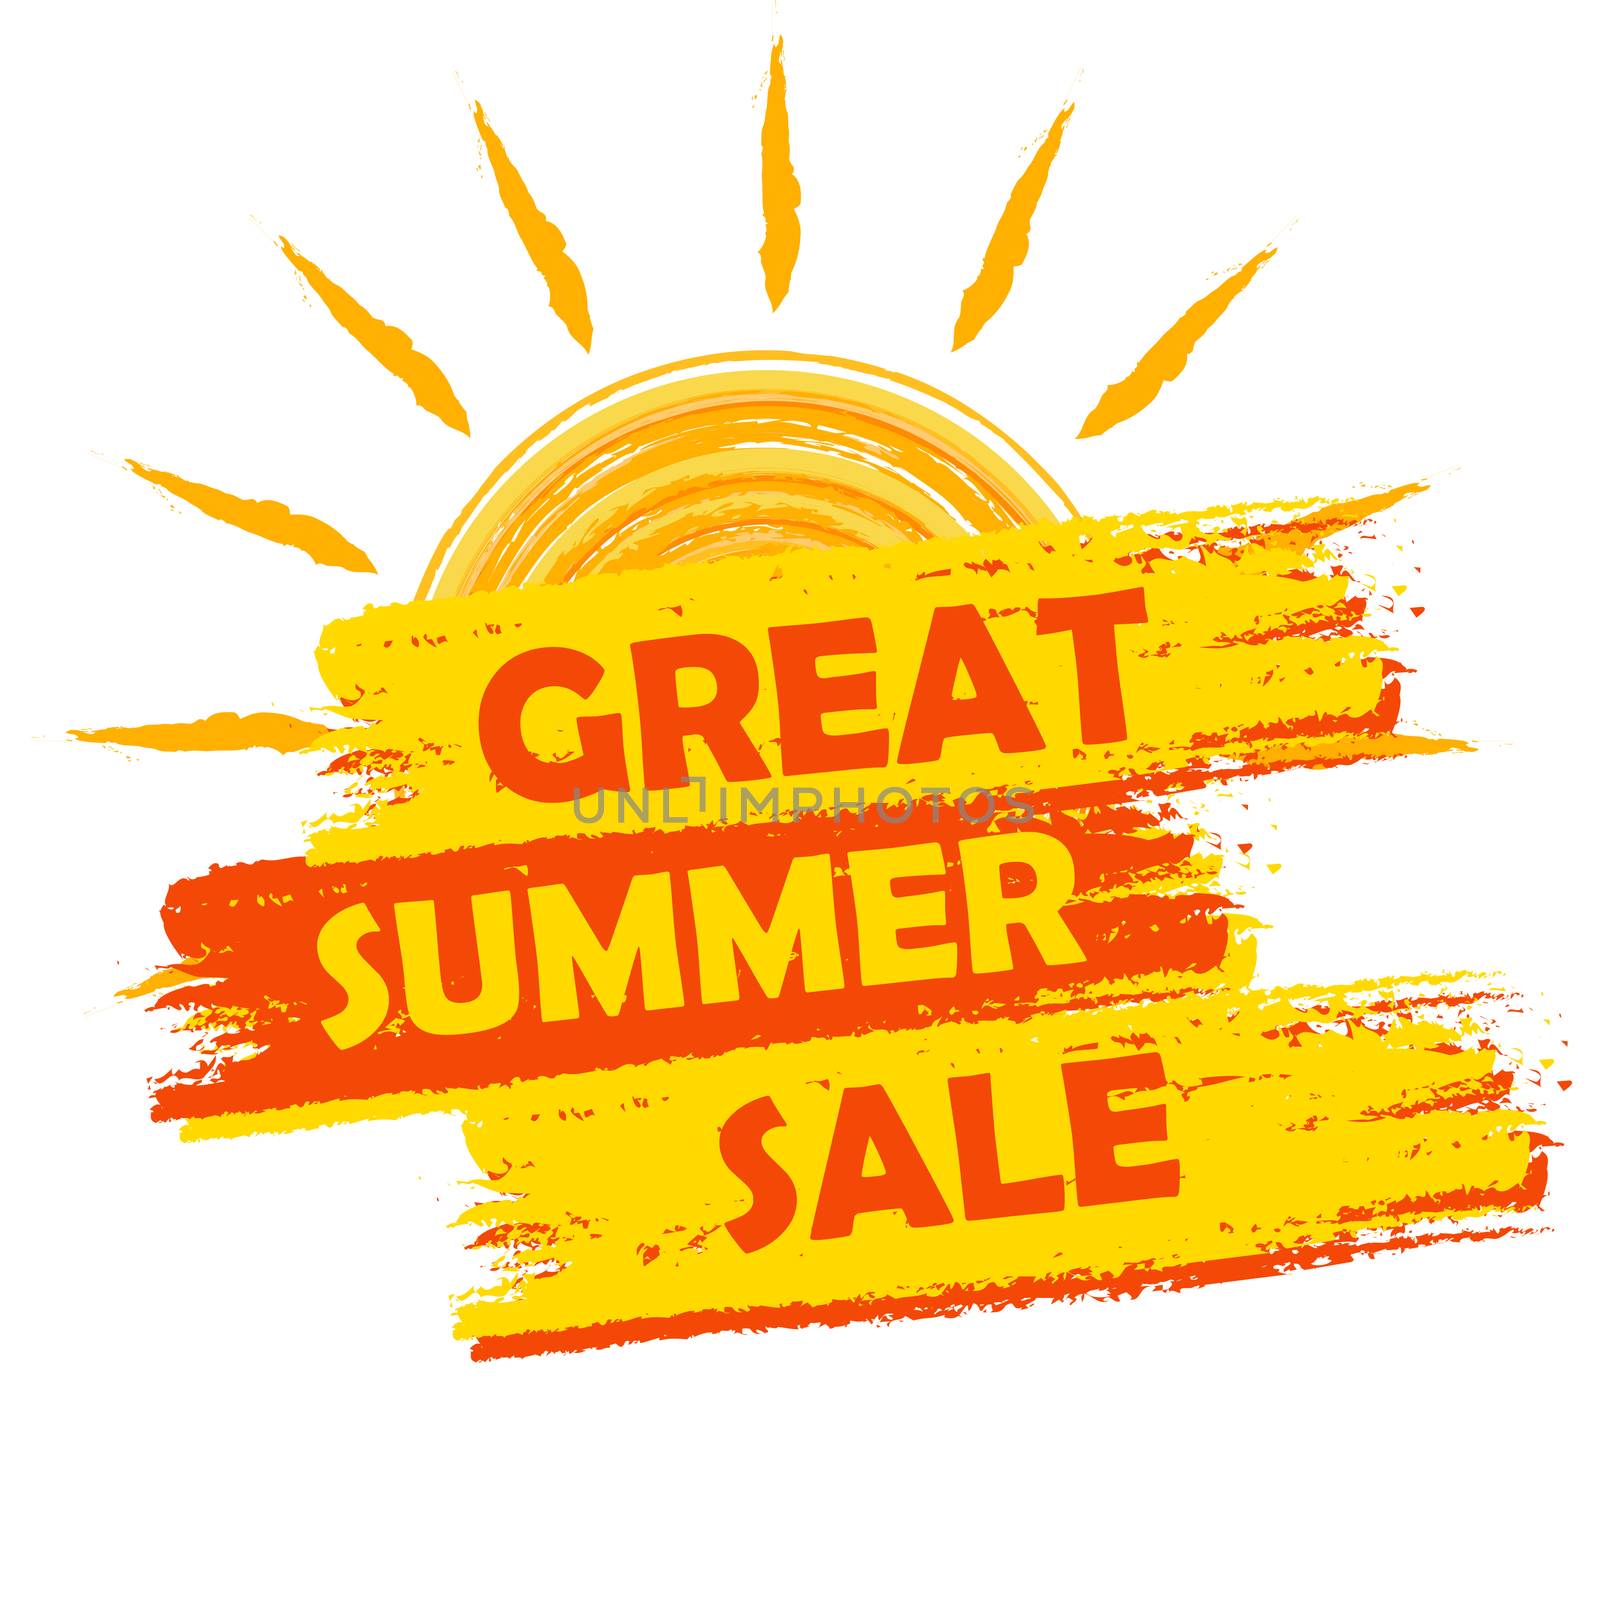 great summer sale with sun sign, yellow and orange drawn label by marinini